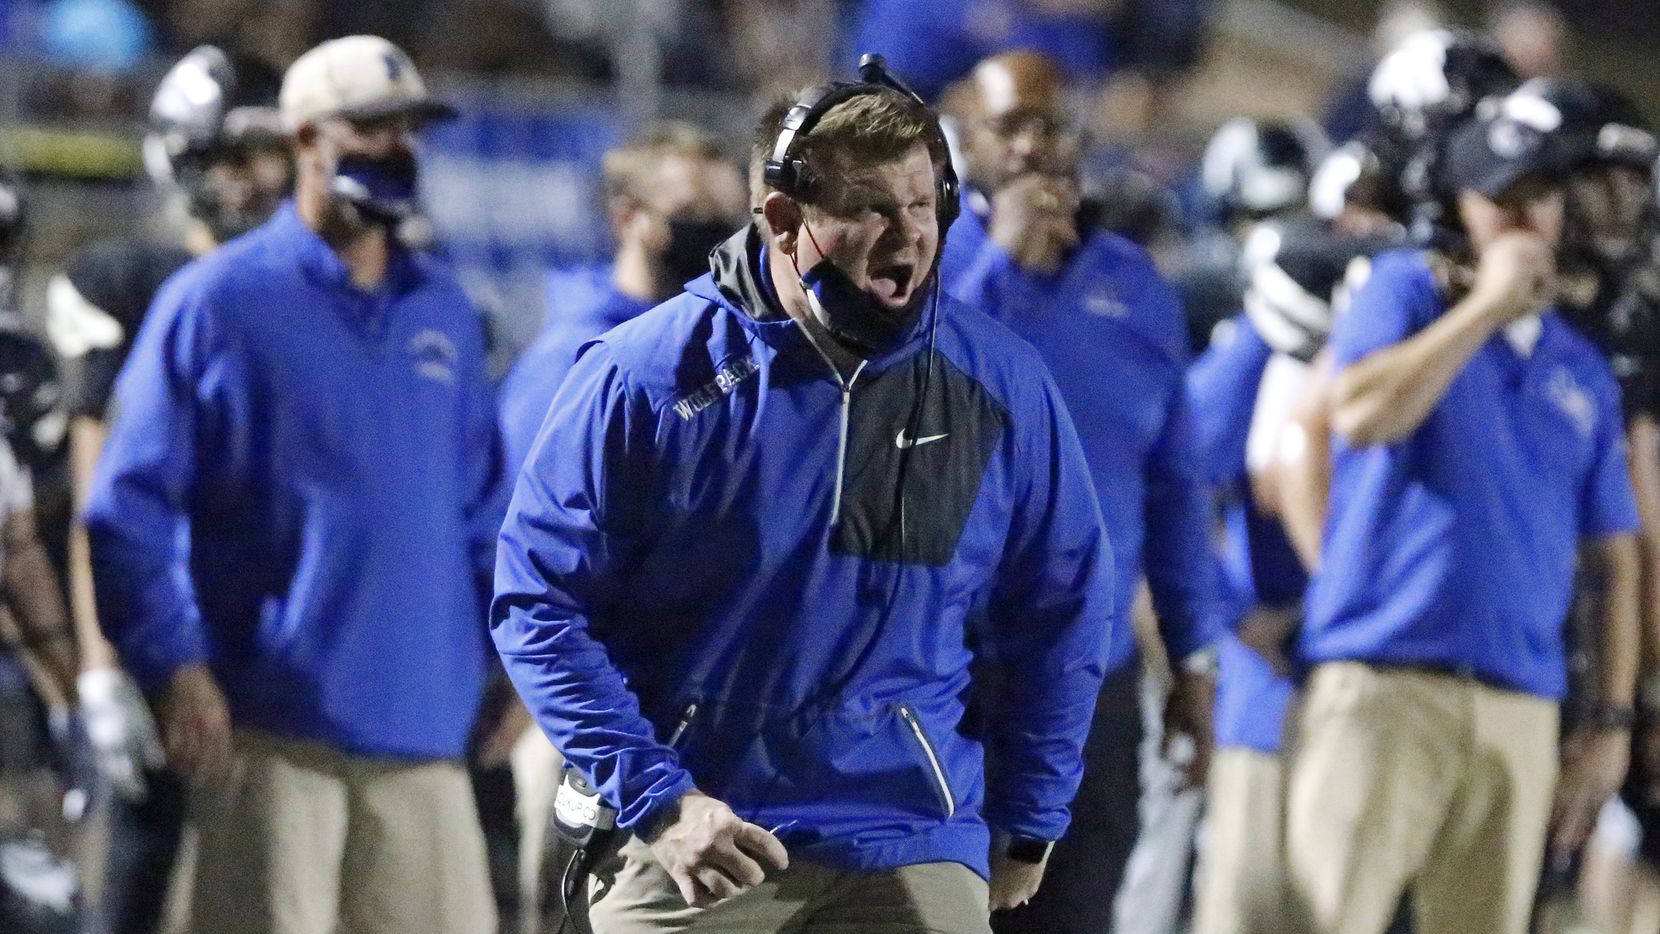 Plano West High School head coach Tyler Soukup calls out to his team during the first half as Plano West High School hosted Flower Mound Marcus High School in a District 6-6A football game at Clark Stadium in Plano on Friday night, November 13, 2020.